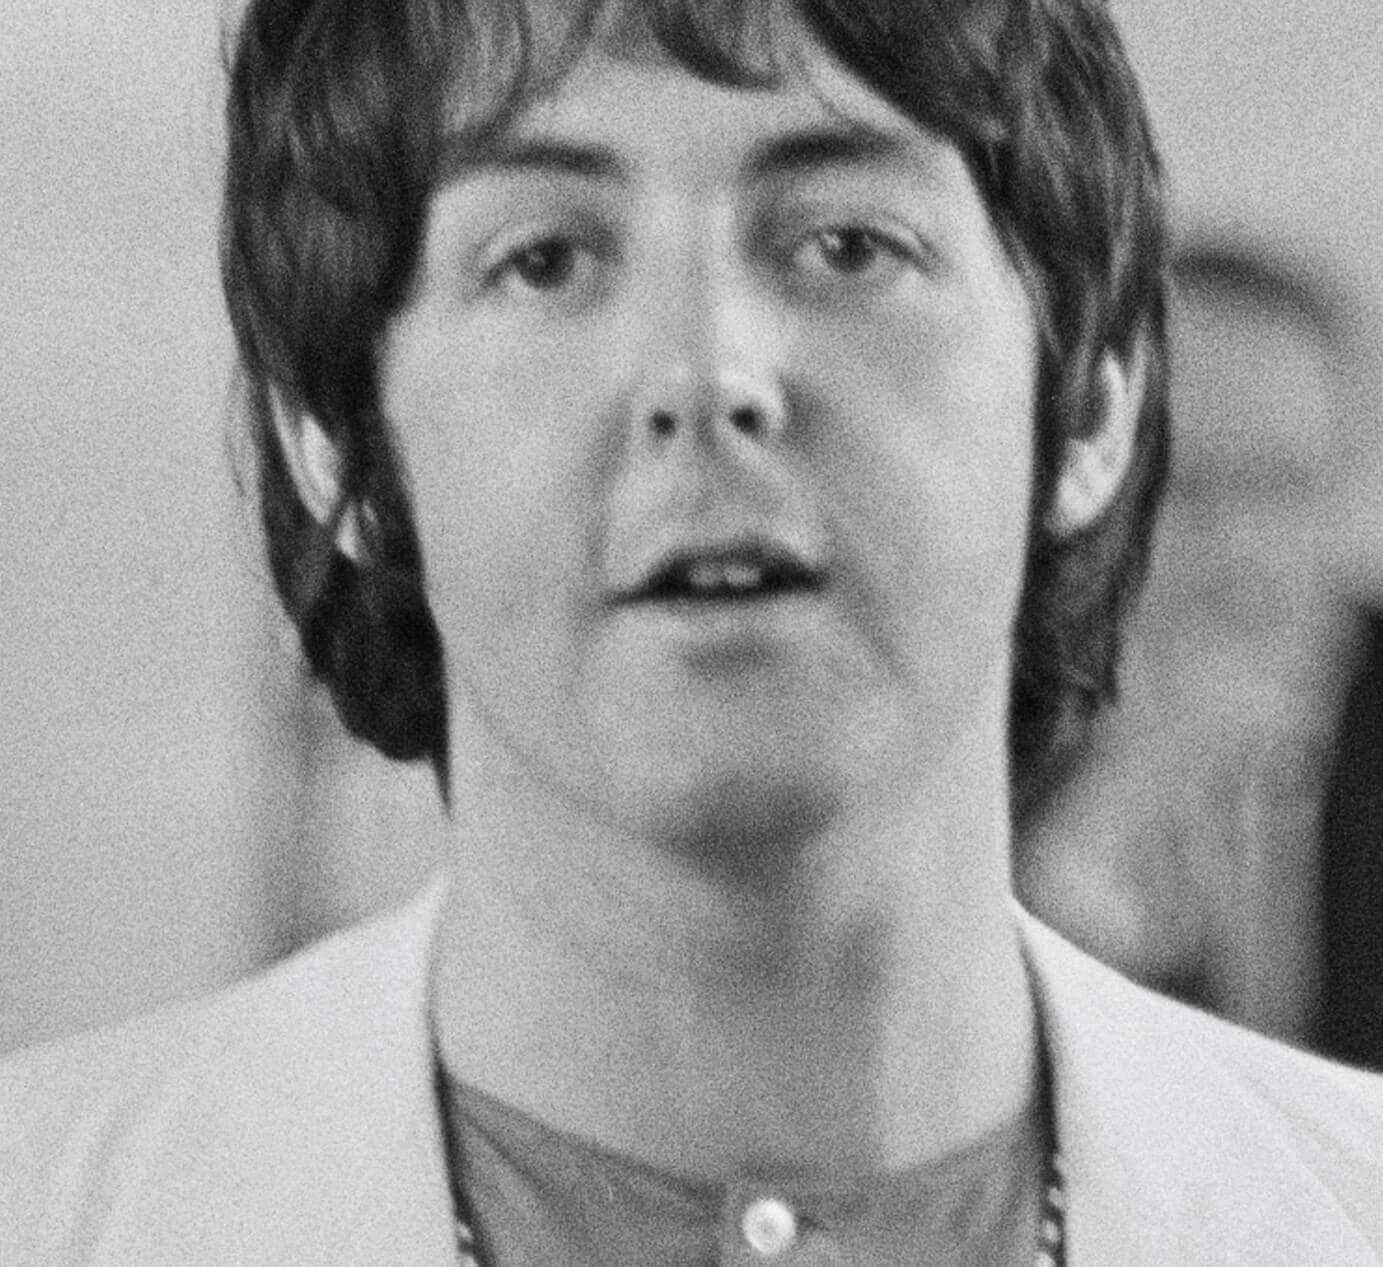 Paul McCartney in black-and-white